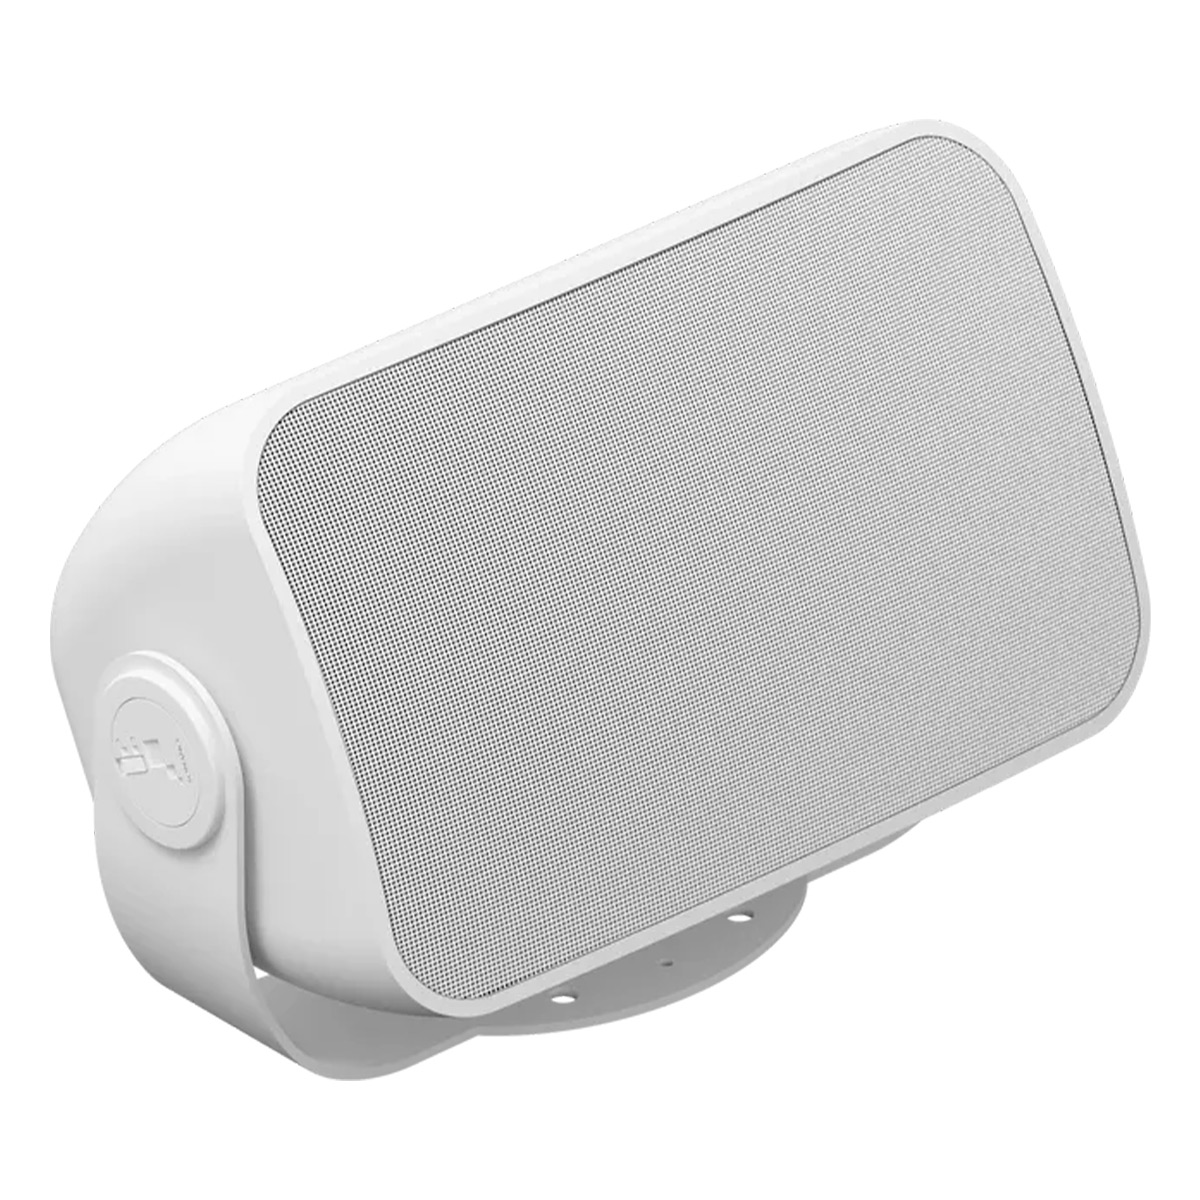 Sonos OUTDRWW1 Outdoor Architectural Speakers - Pair (White) - image 5 of 8